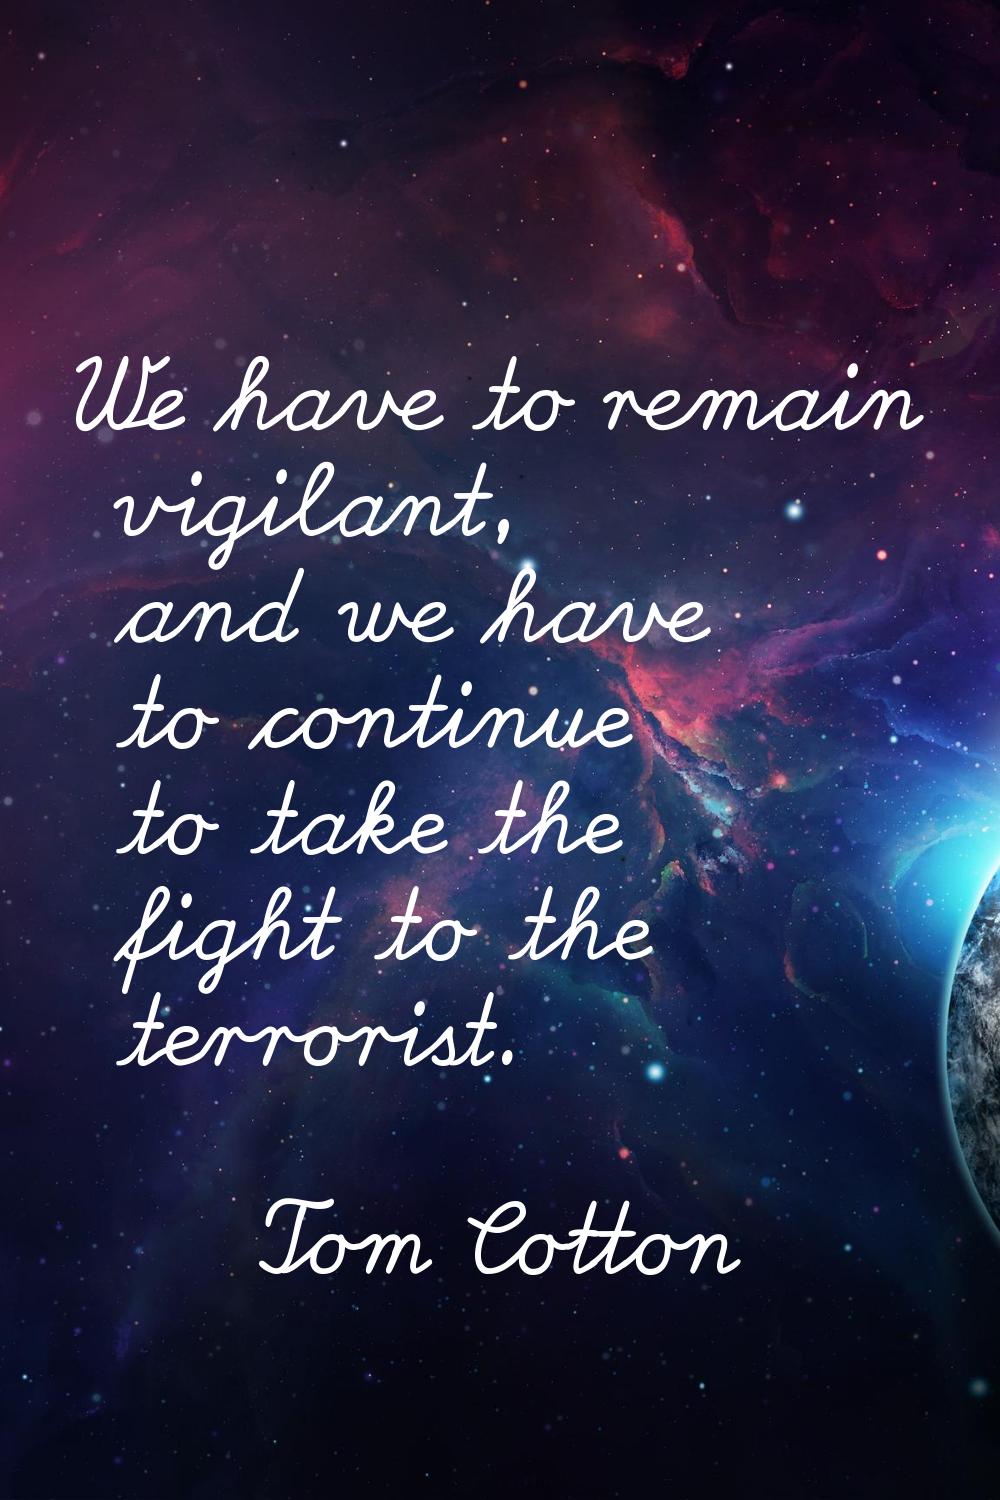 We have to remain vigilant, and we have to continue to take the fight to the terrorist.